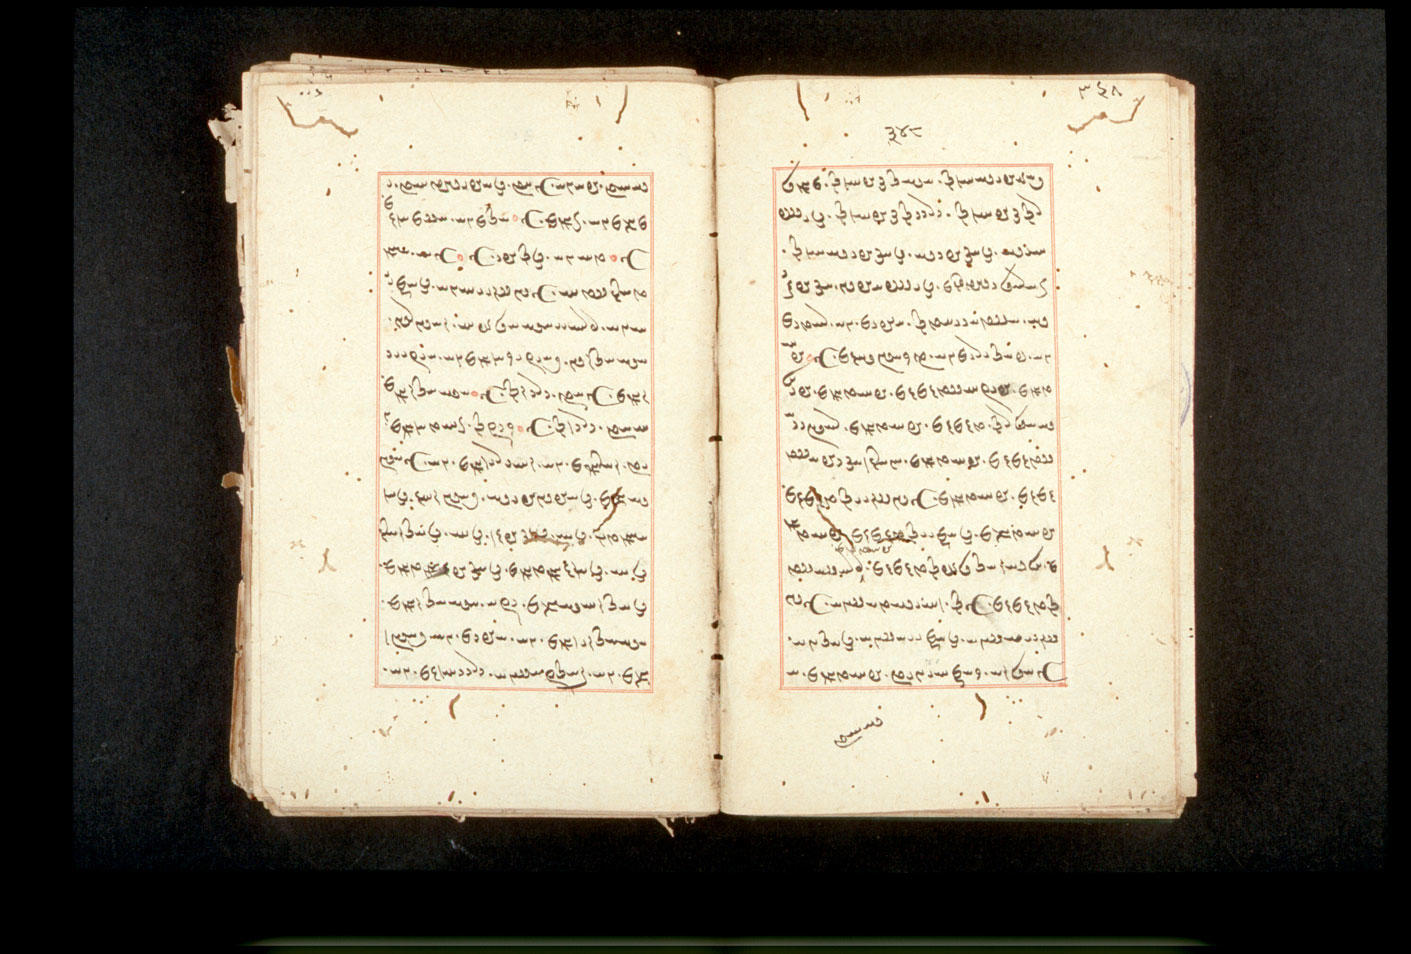 Folios 348v (right) and 349r (left)